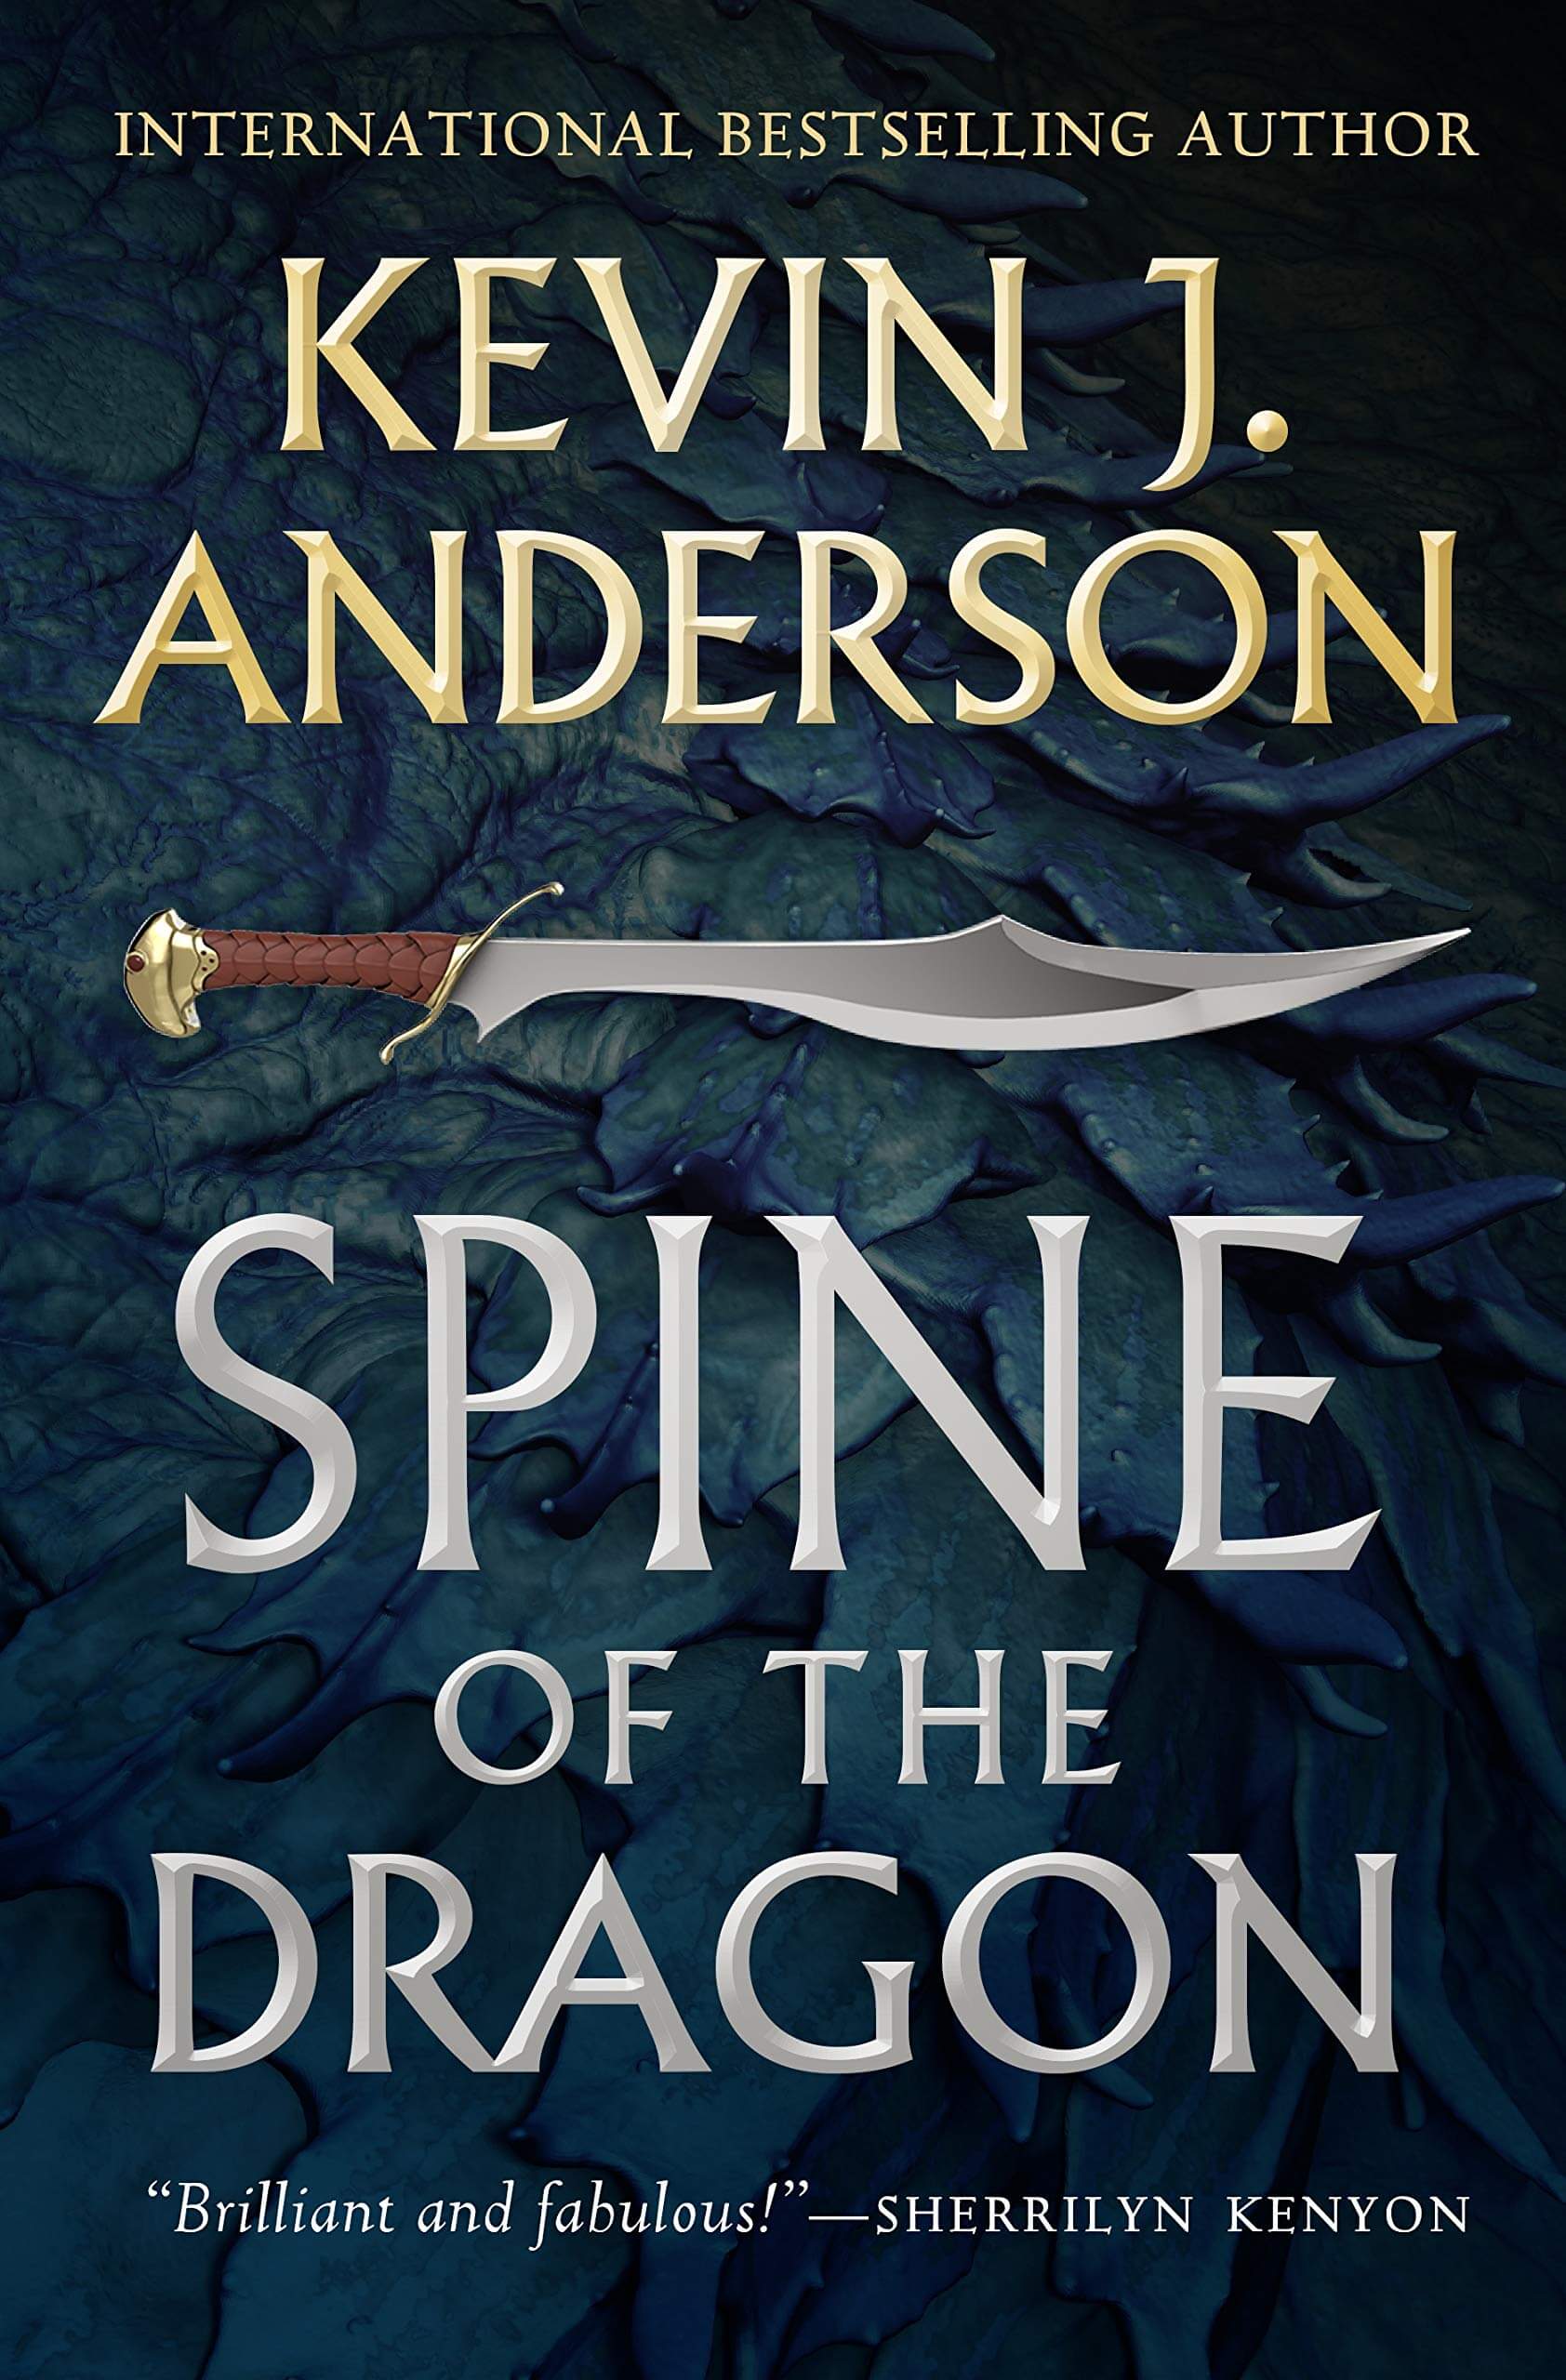 Kevin J. Anderson, Spine of the Dragon